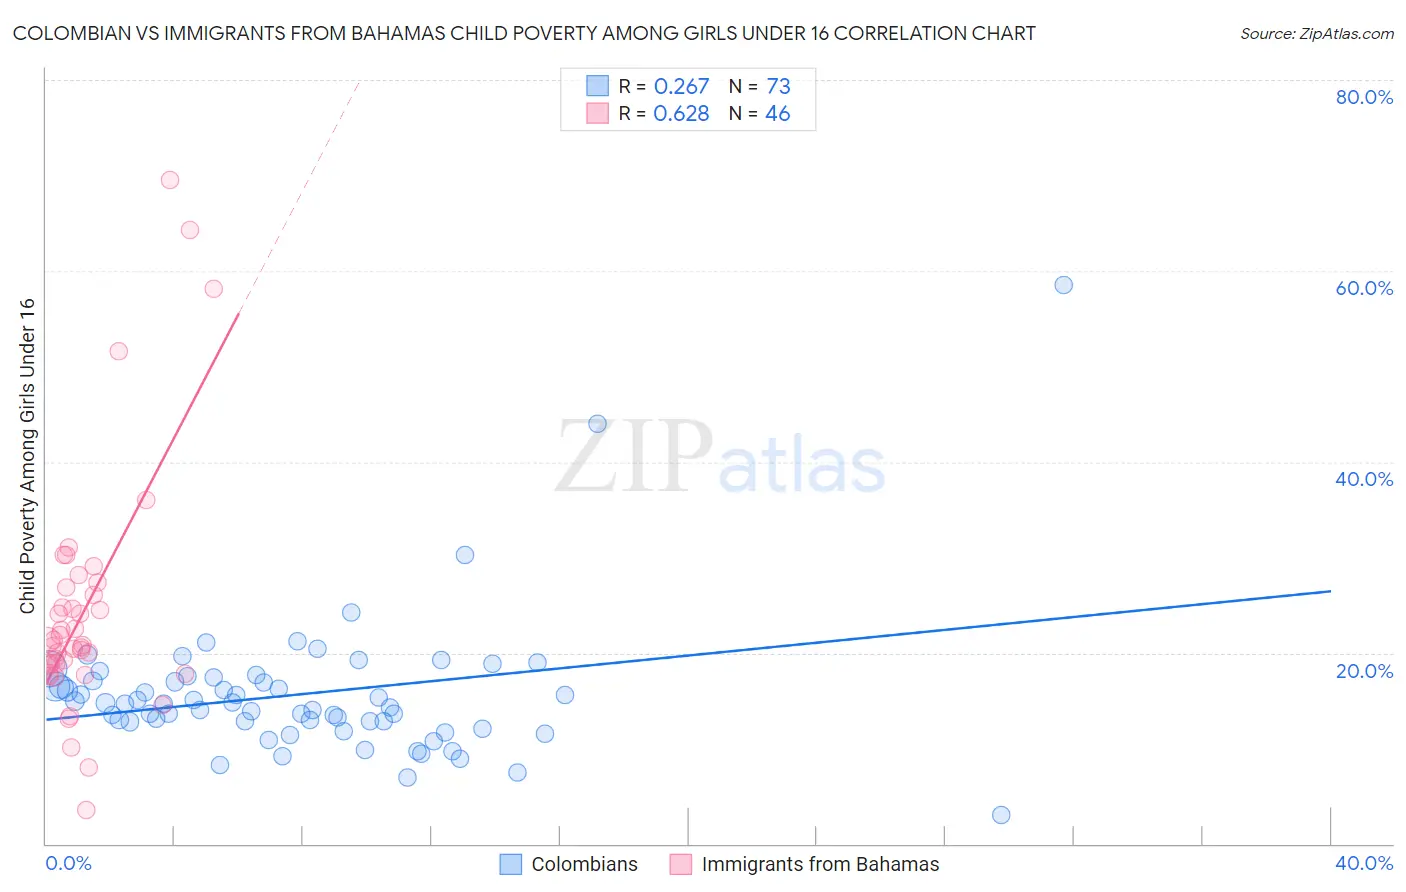 Colombian vs Immigrants from Bahamas Child Poverty Among Girls Under 16